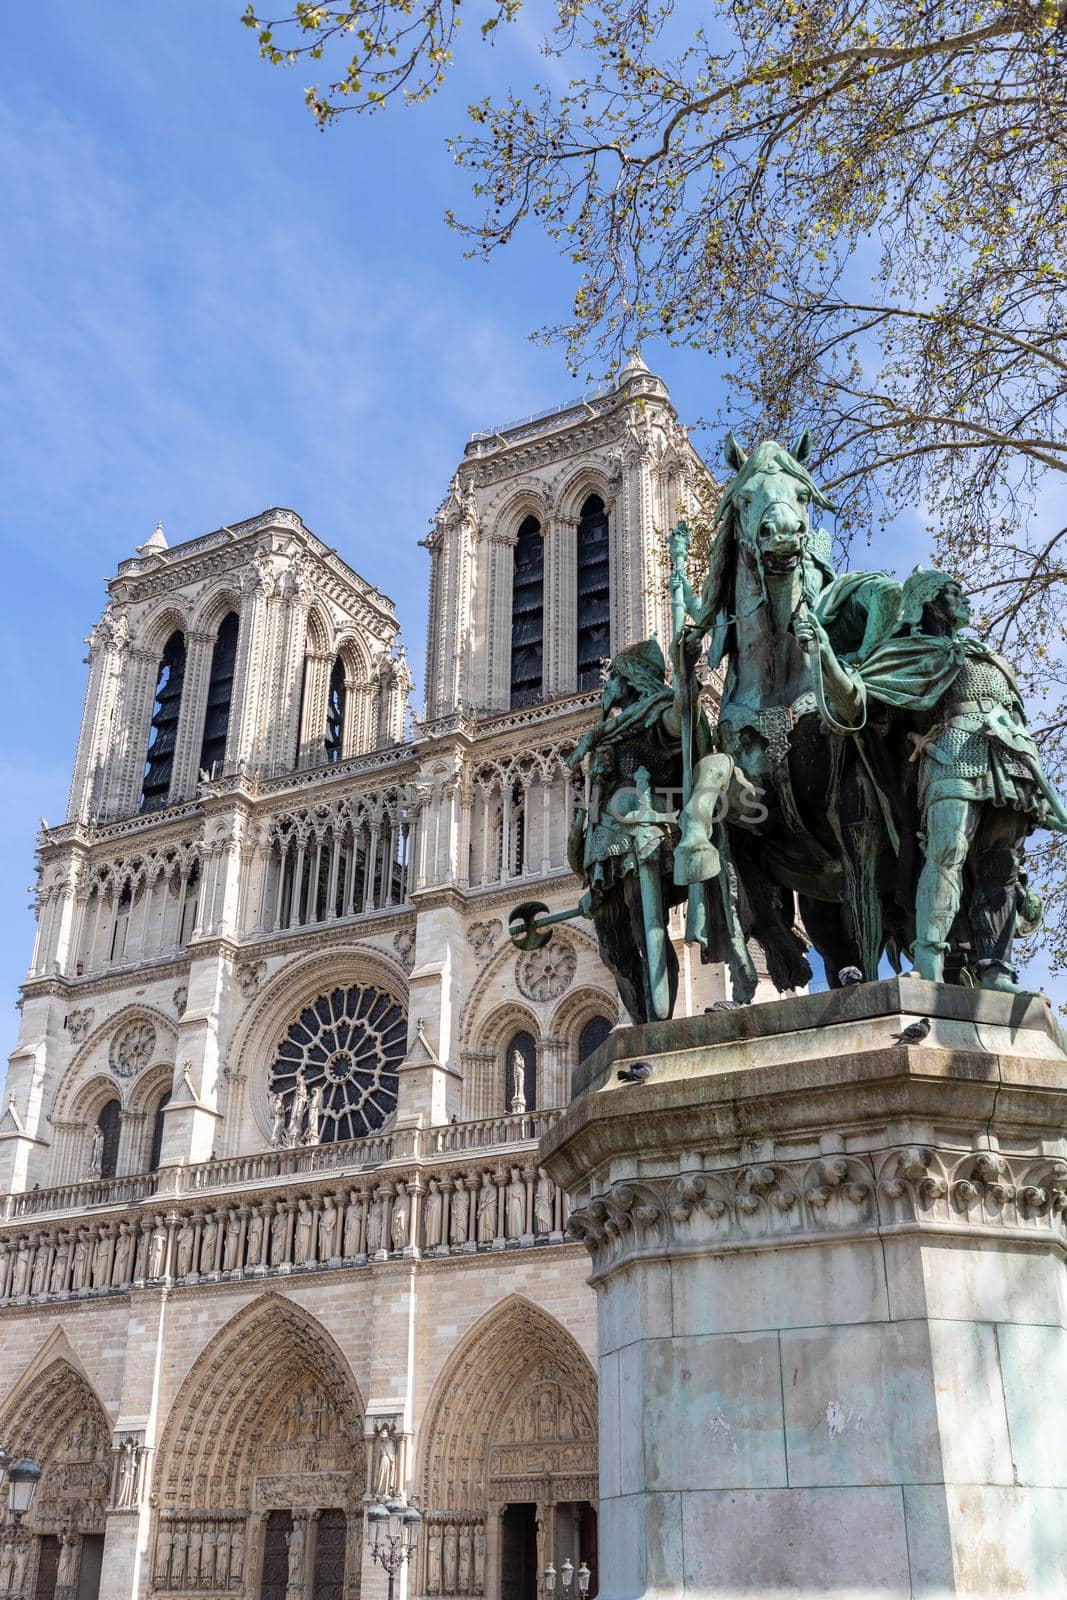 Statue of Charlemagne and cathedral Notre-Dame, Paris, France